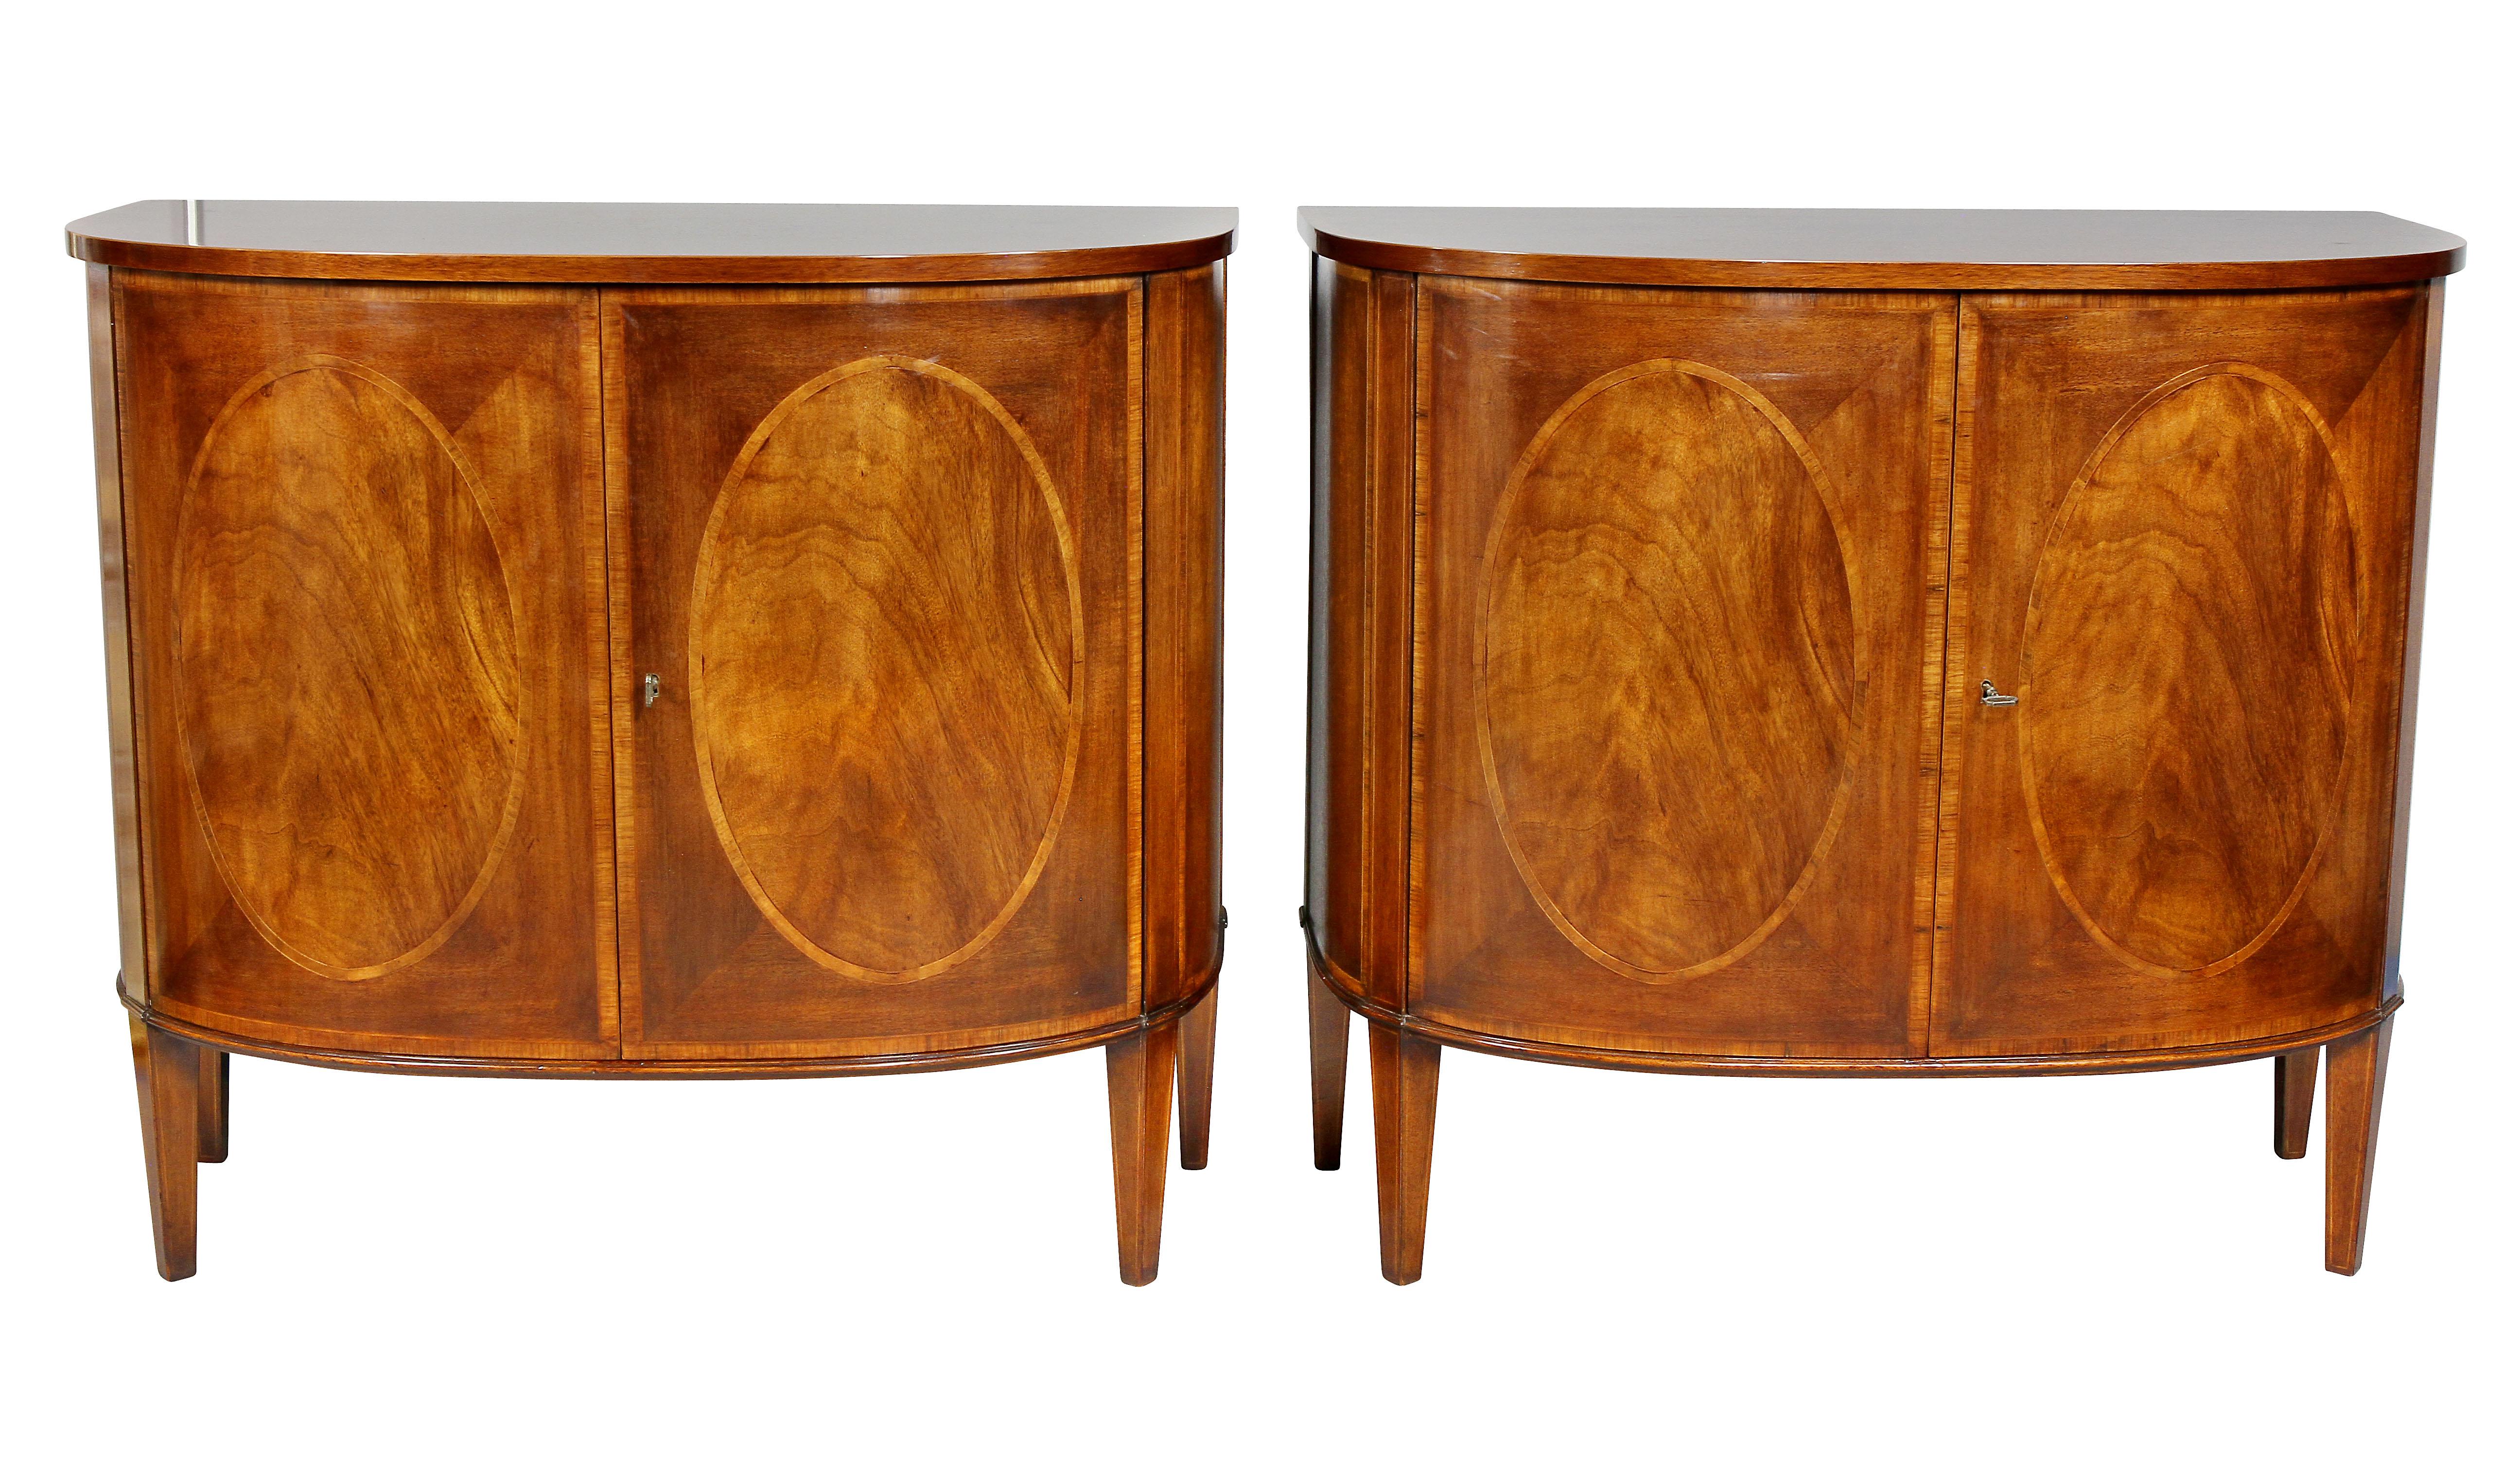 Each with a bowed crossbanded top over a pair of conforming doors with oval panels enclosing a shelf and raised on square tapered legs. Made by Smith and Watson, New York.